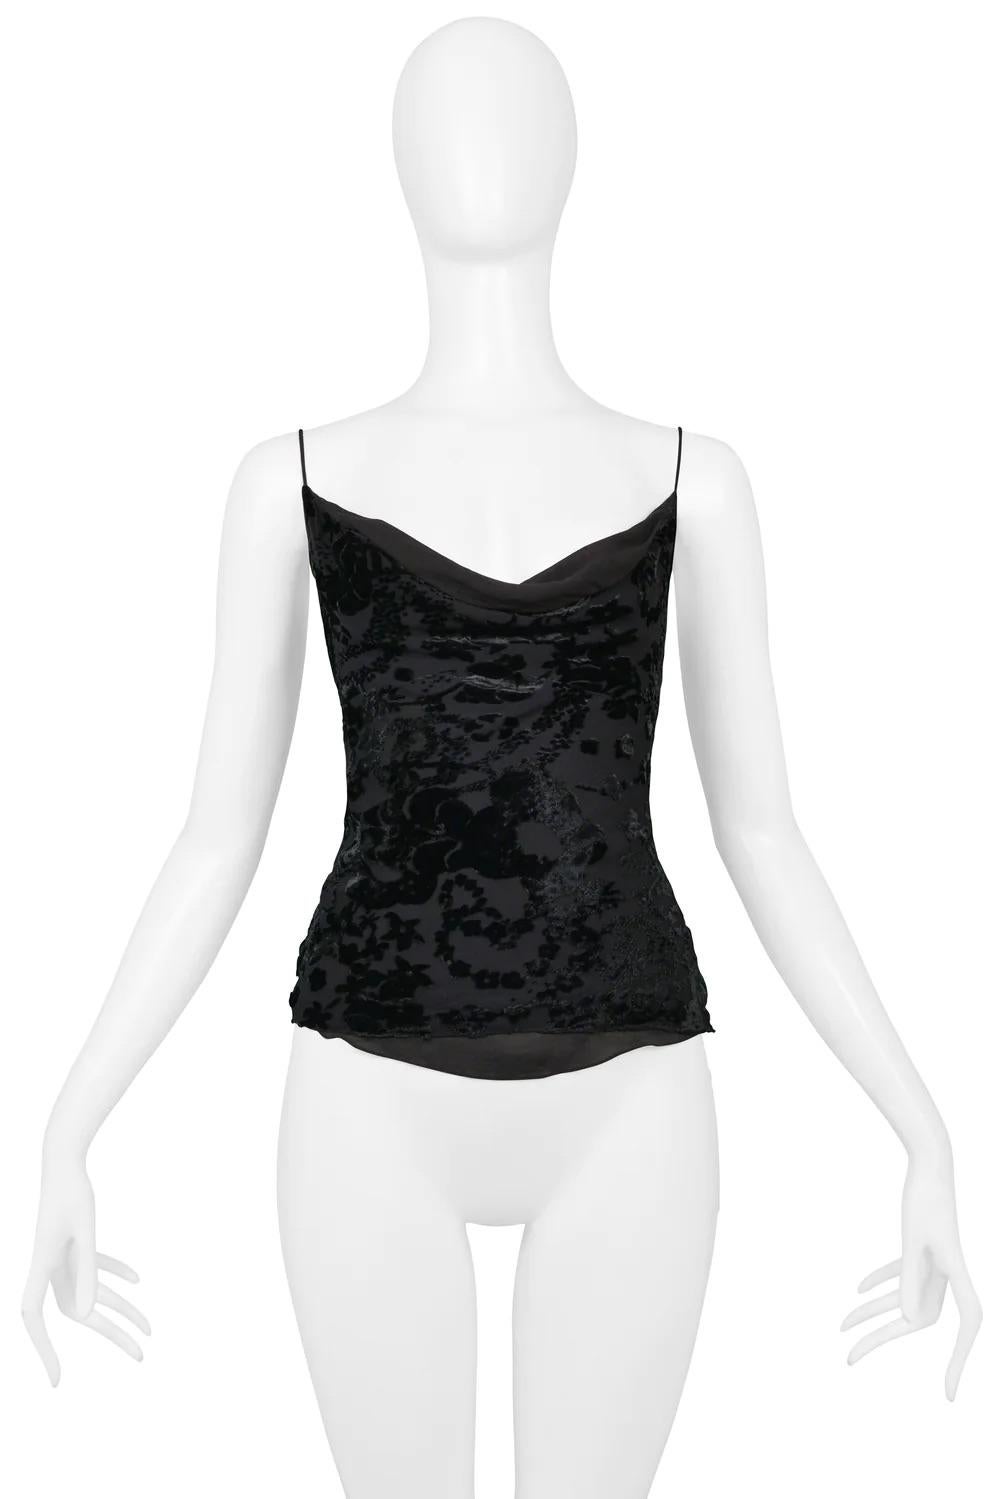 Resurrection is excited to offer a vintage Christian Dior black cut velvet camisole top featuring sheer ruffles, and open back.

Christian Dior Paris
Designed by John Galliano 
Size F 38
Fabric: Shell 66% Viscose, 34% Silk, Lining 100%